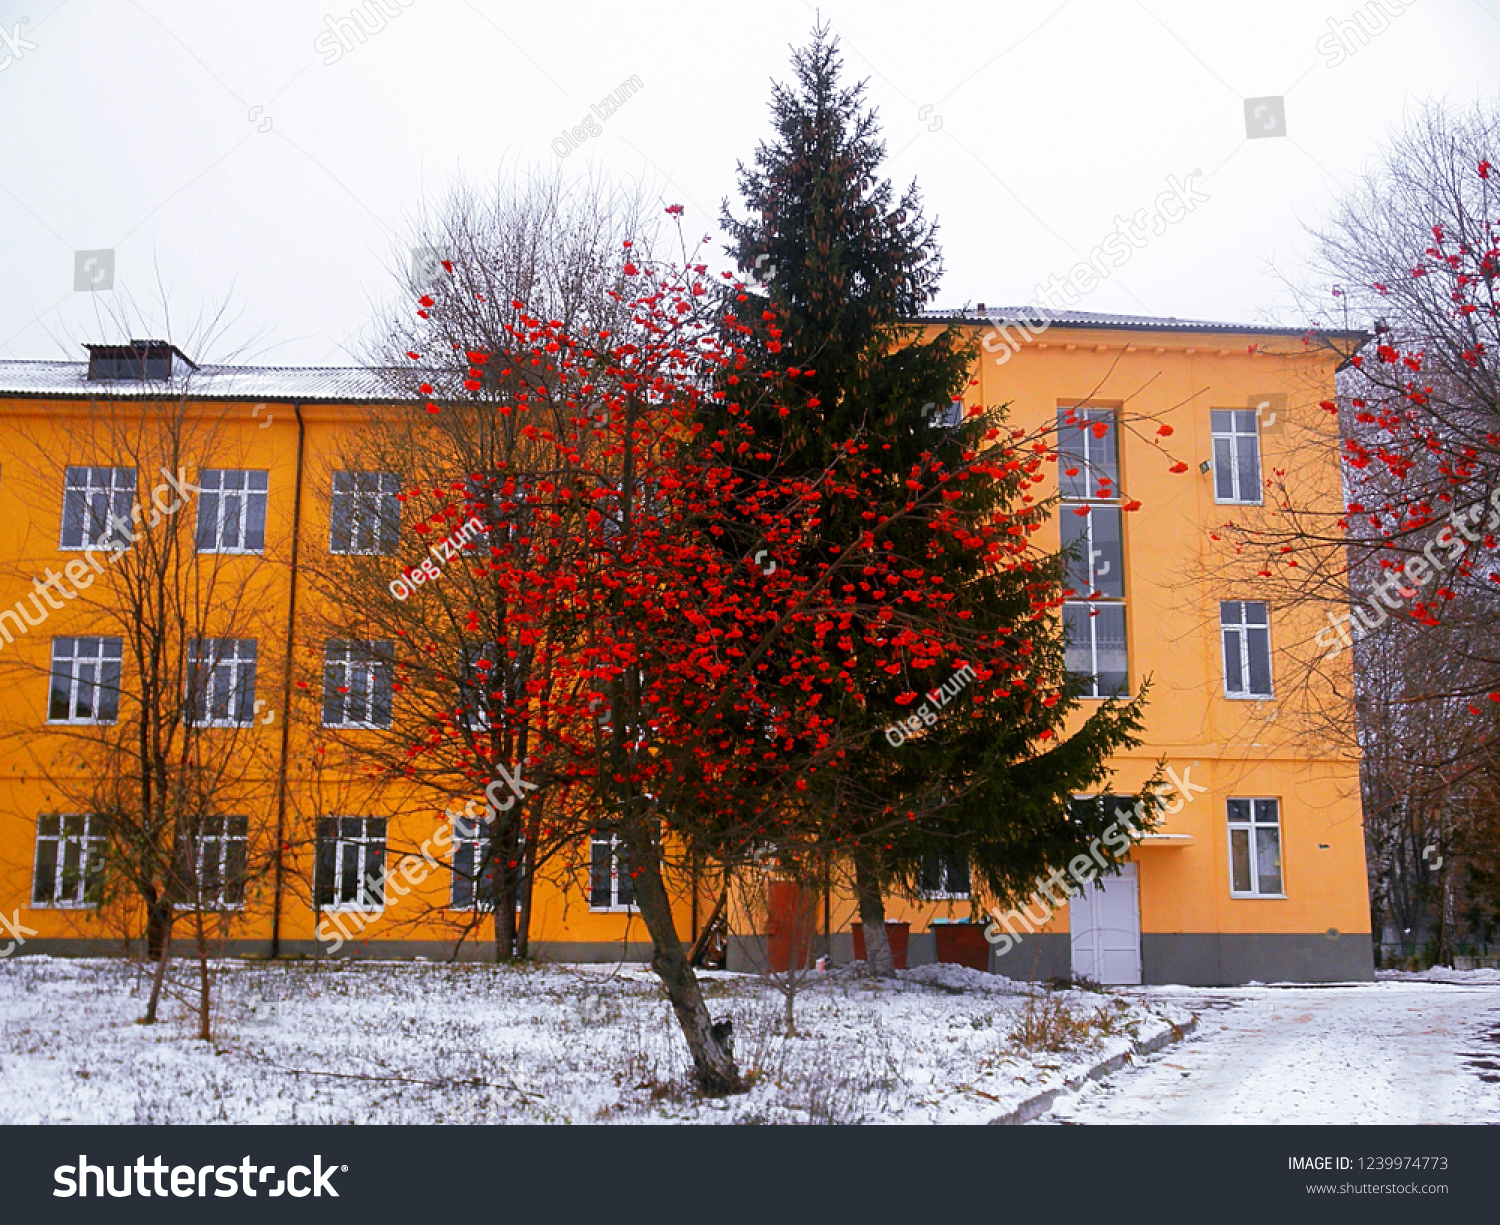 Blooming Winter Tree Against Backdrop Bright Stock Photo Edit Now 1239974773